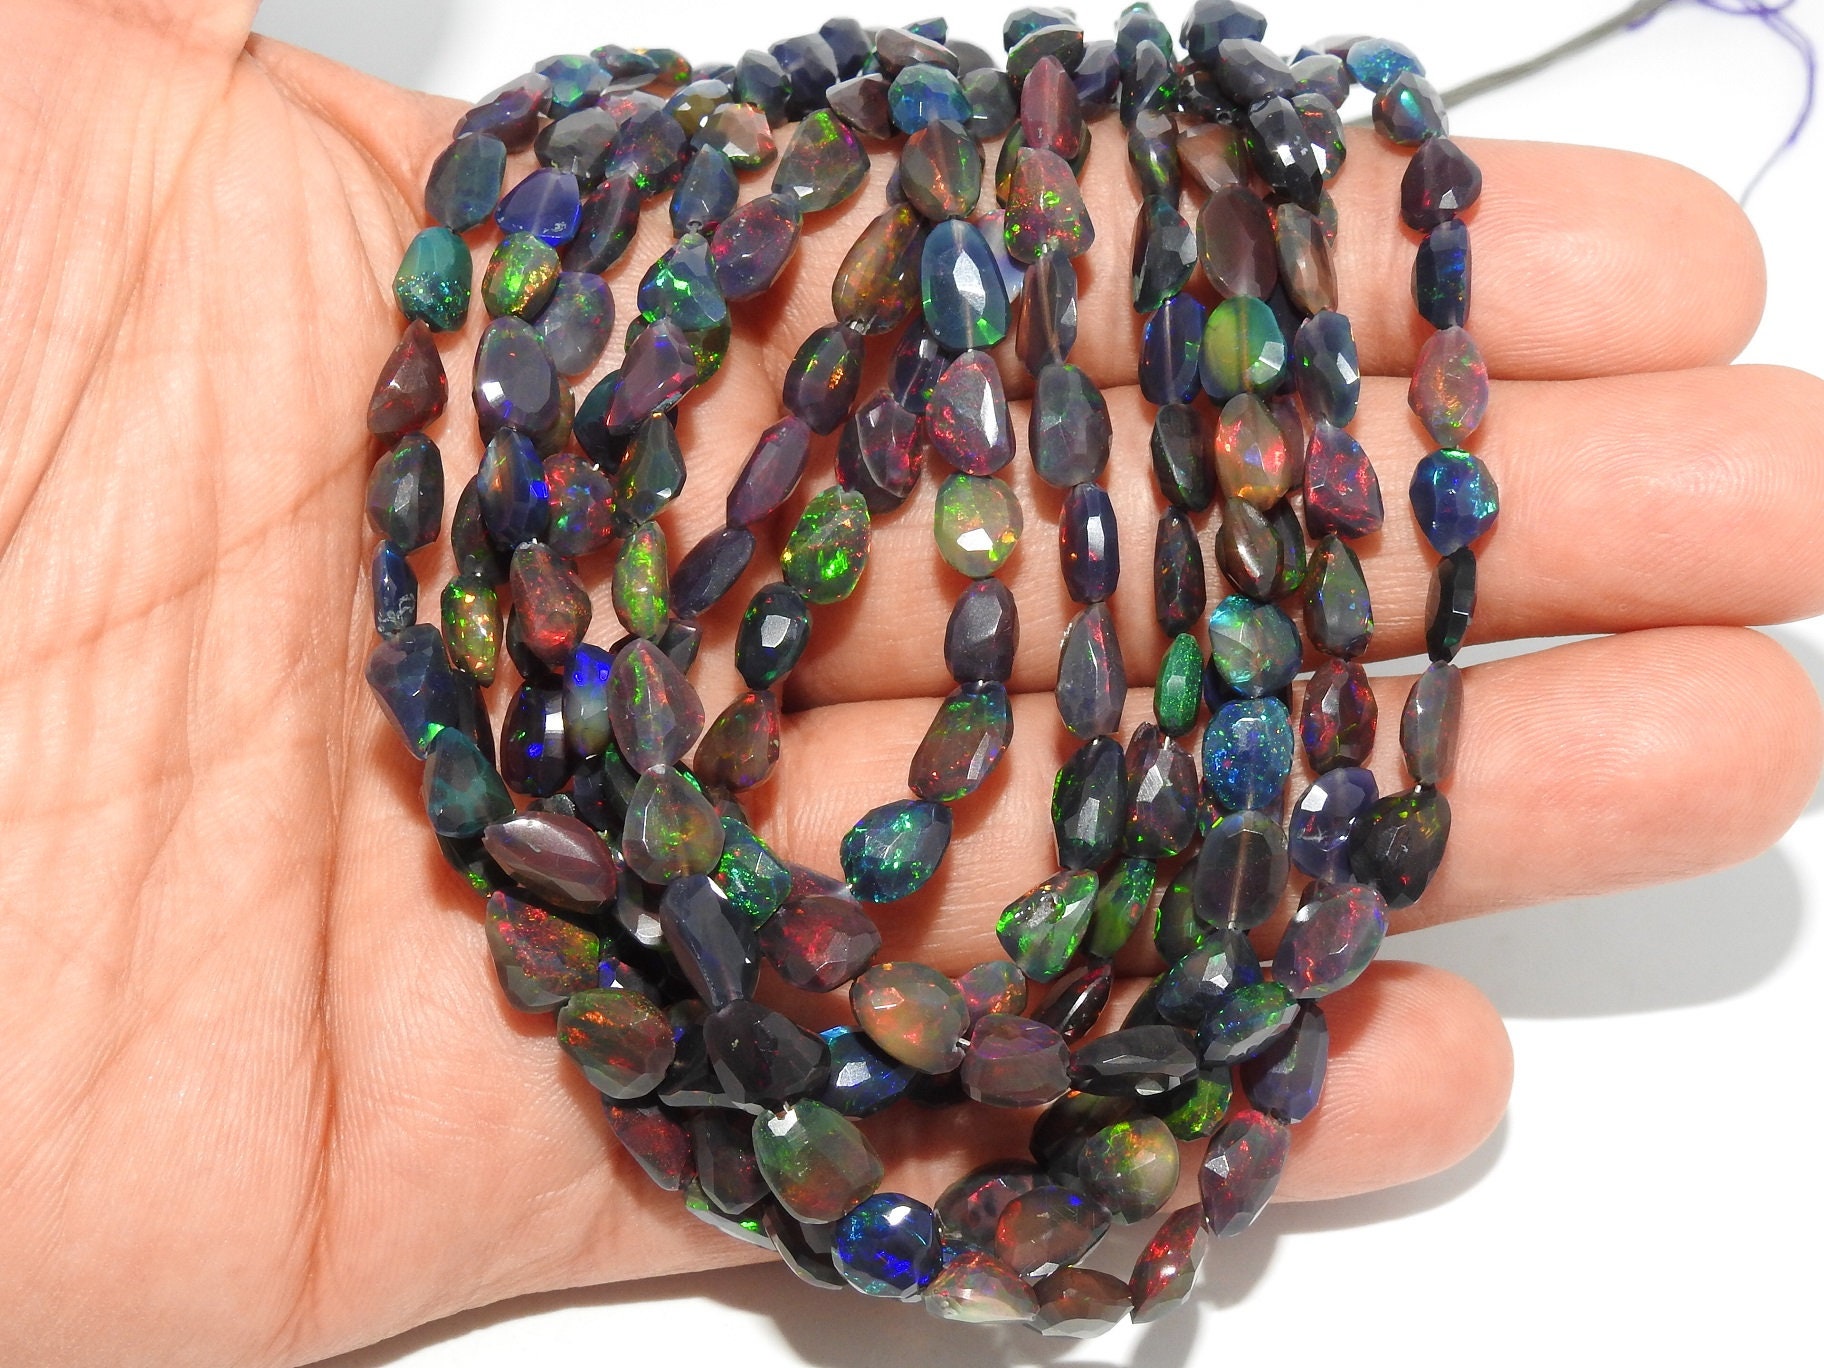 Ethiopian Black Opal Faceted Tumble,Nugget,Multi Flashy Fire,Loose Stone,Loose Bead,Wholesaler,Supplies 12Inch Strand 100%Natural (pme)EO2 | Save 33% - Rajasthan Living 14